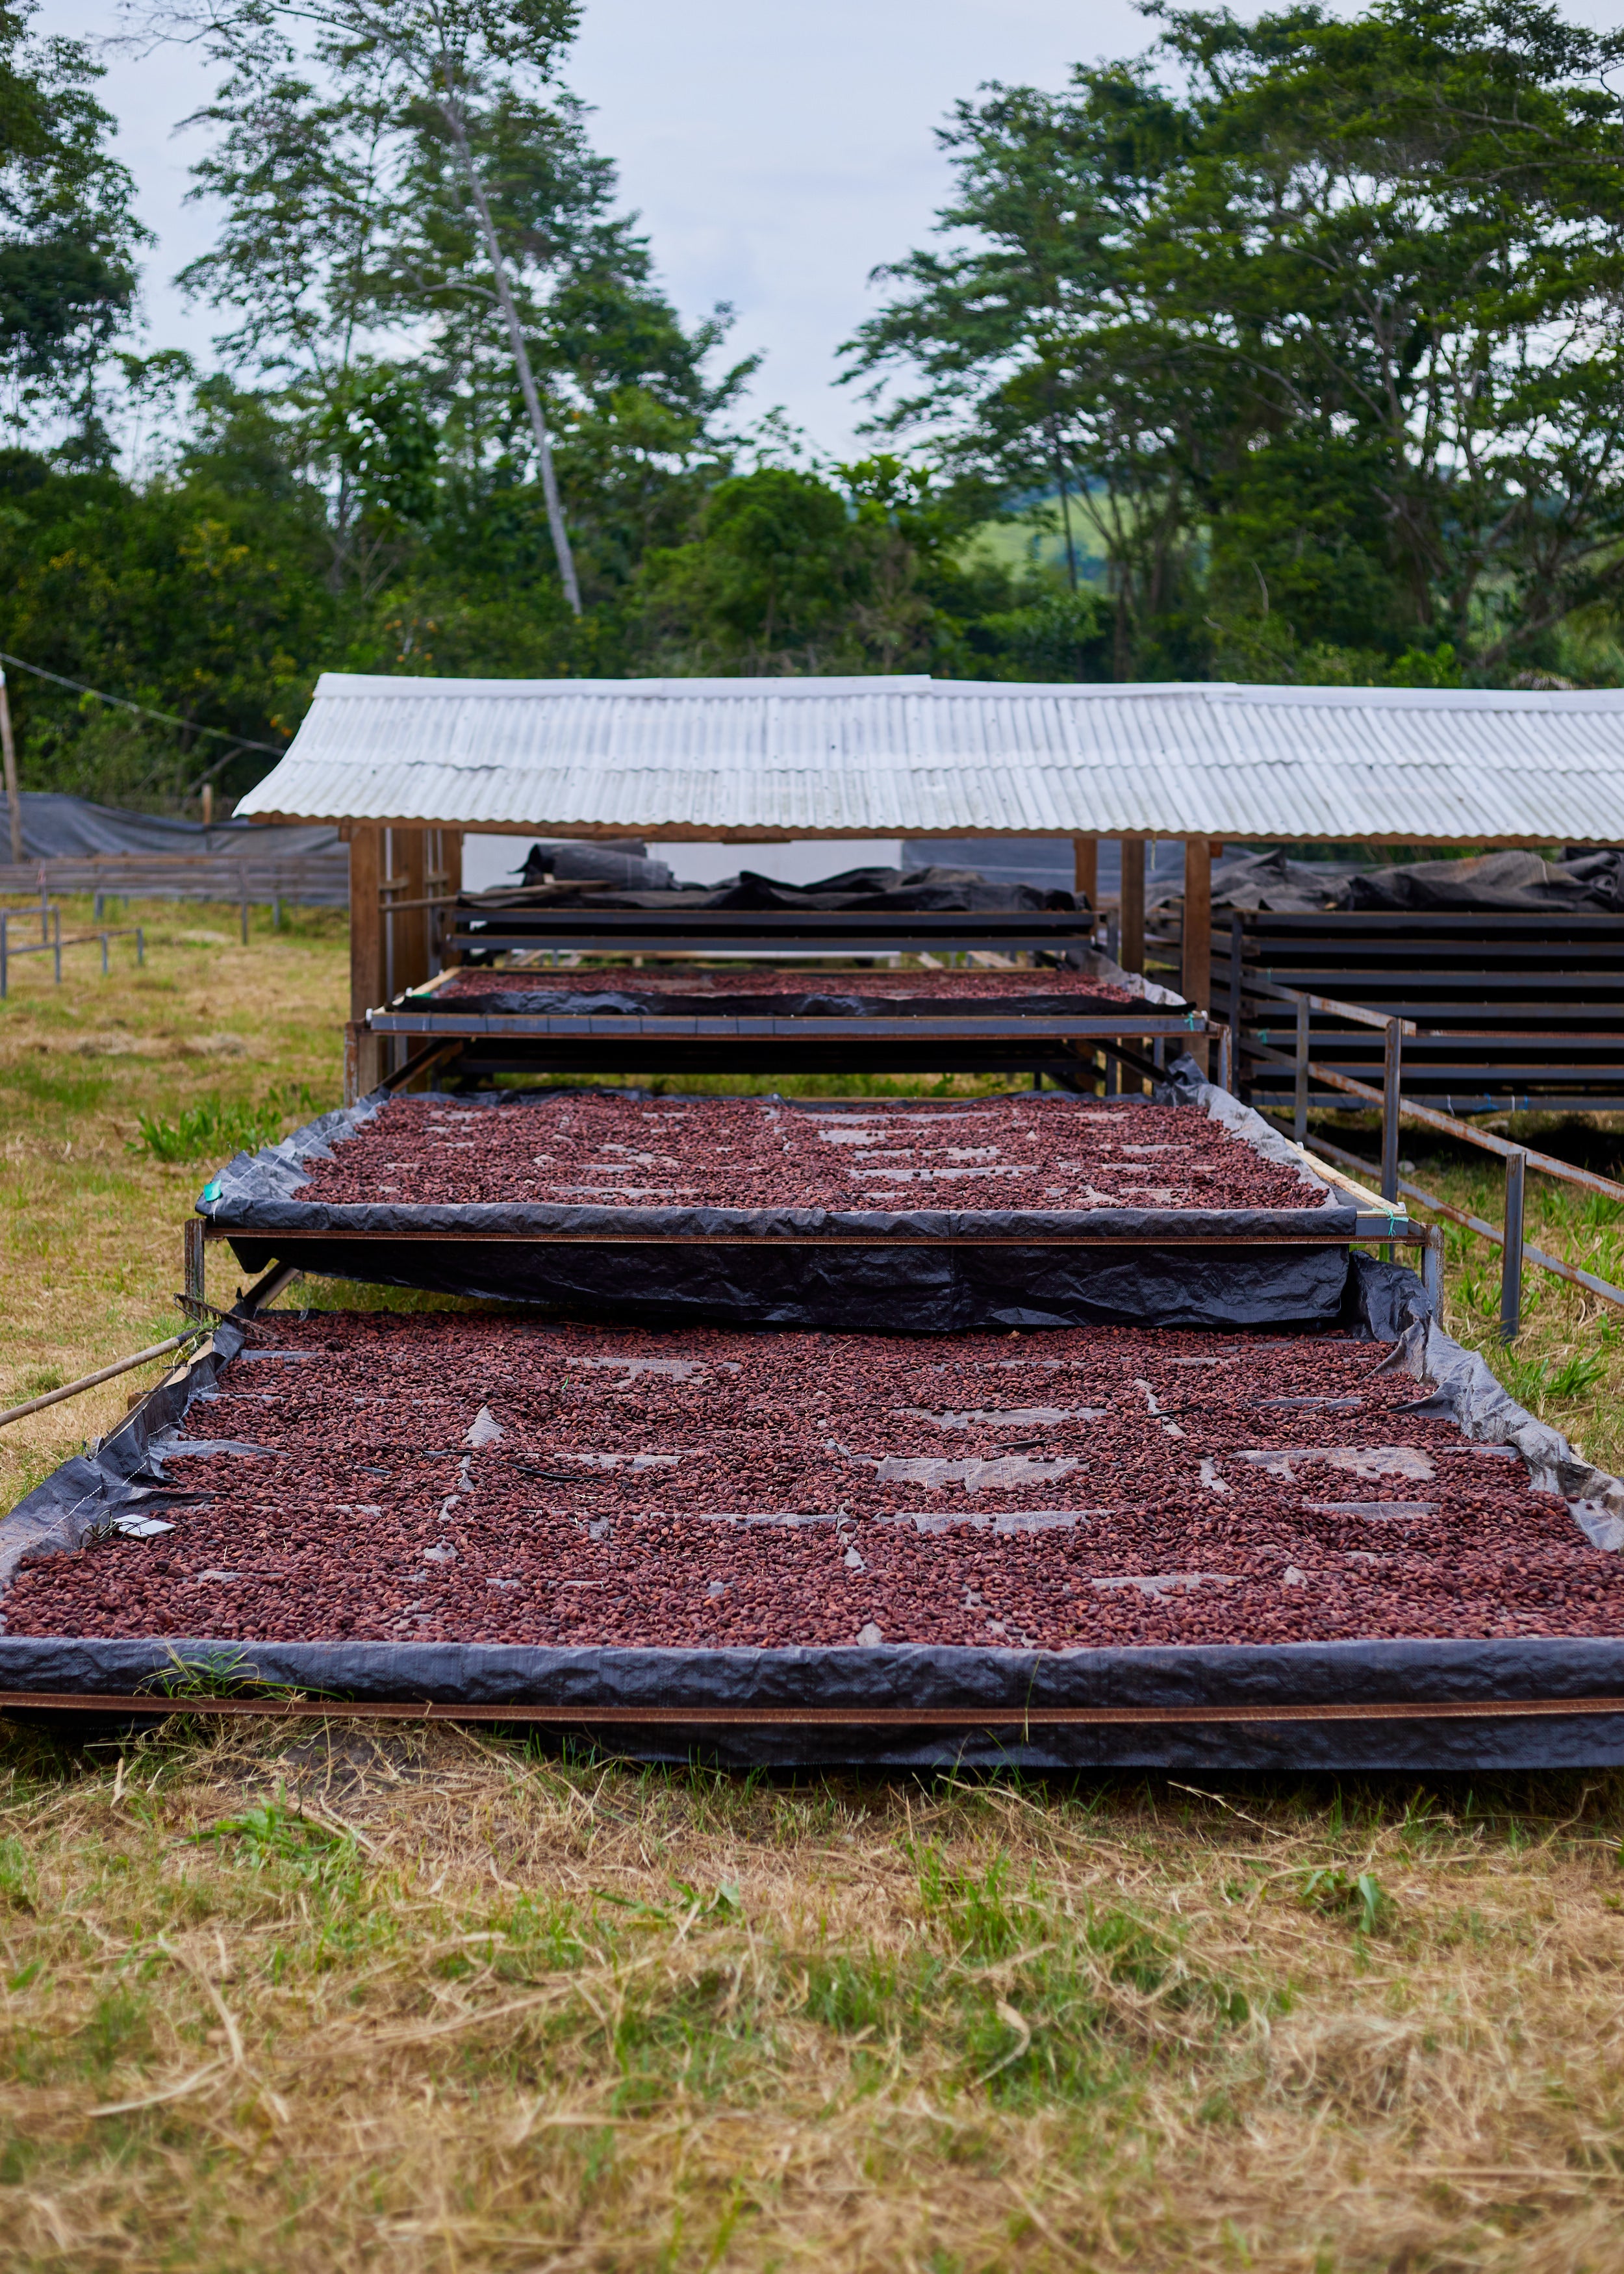 Cacao drying on outdoor racks